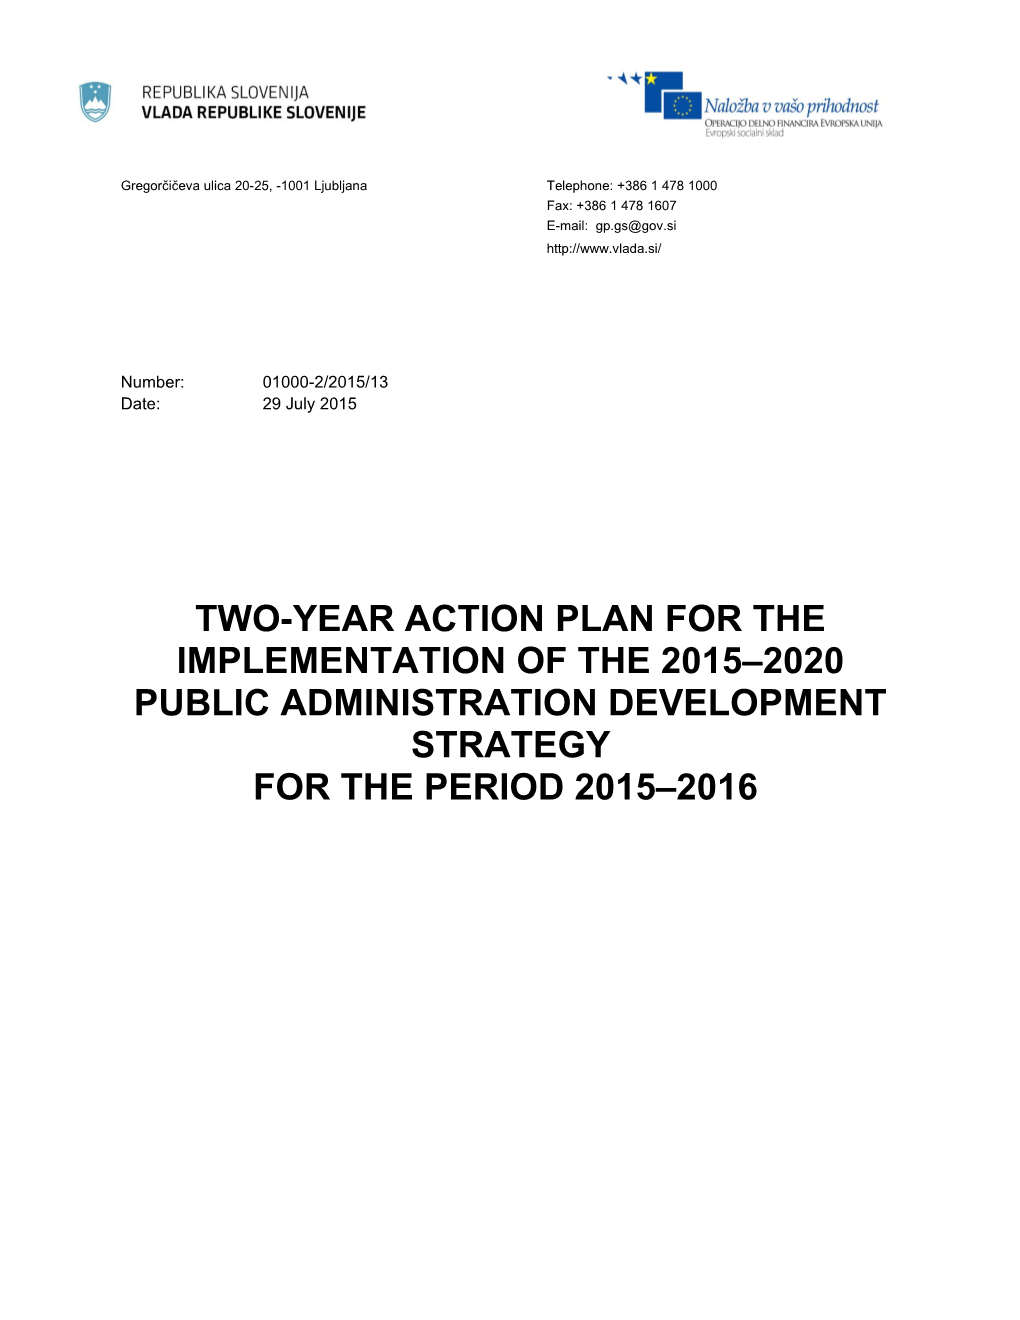 Two-Year Action Plan for the Implementation of the 2015 2020 Public Administration Development